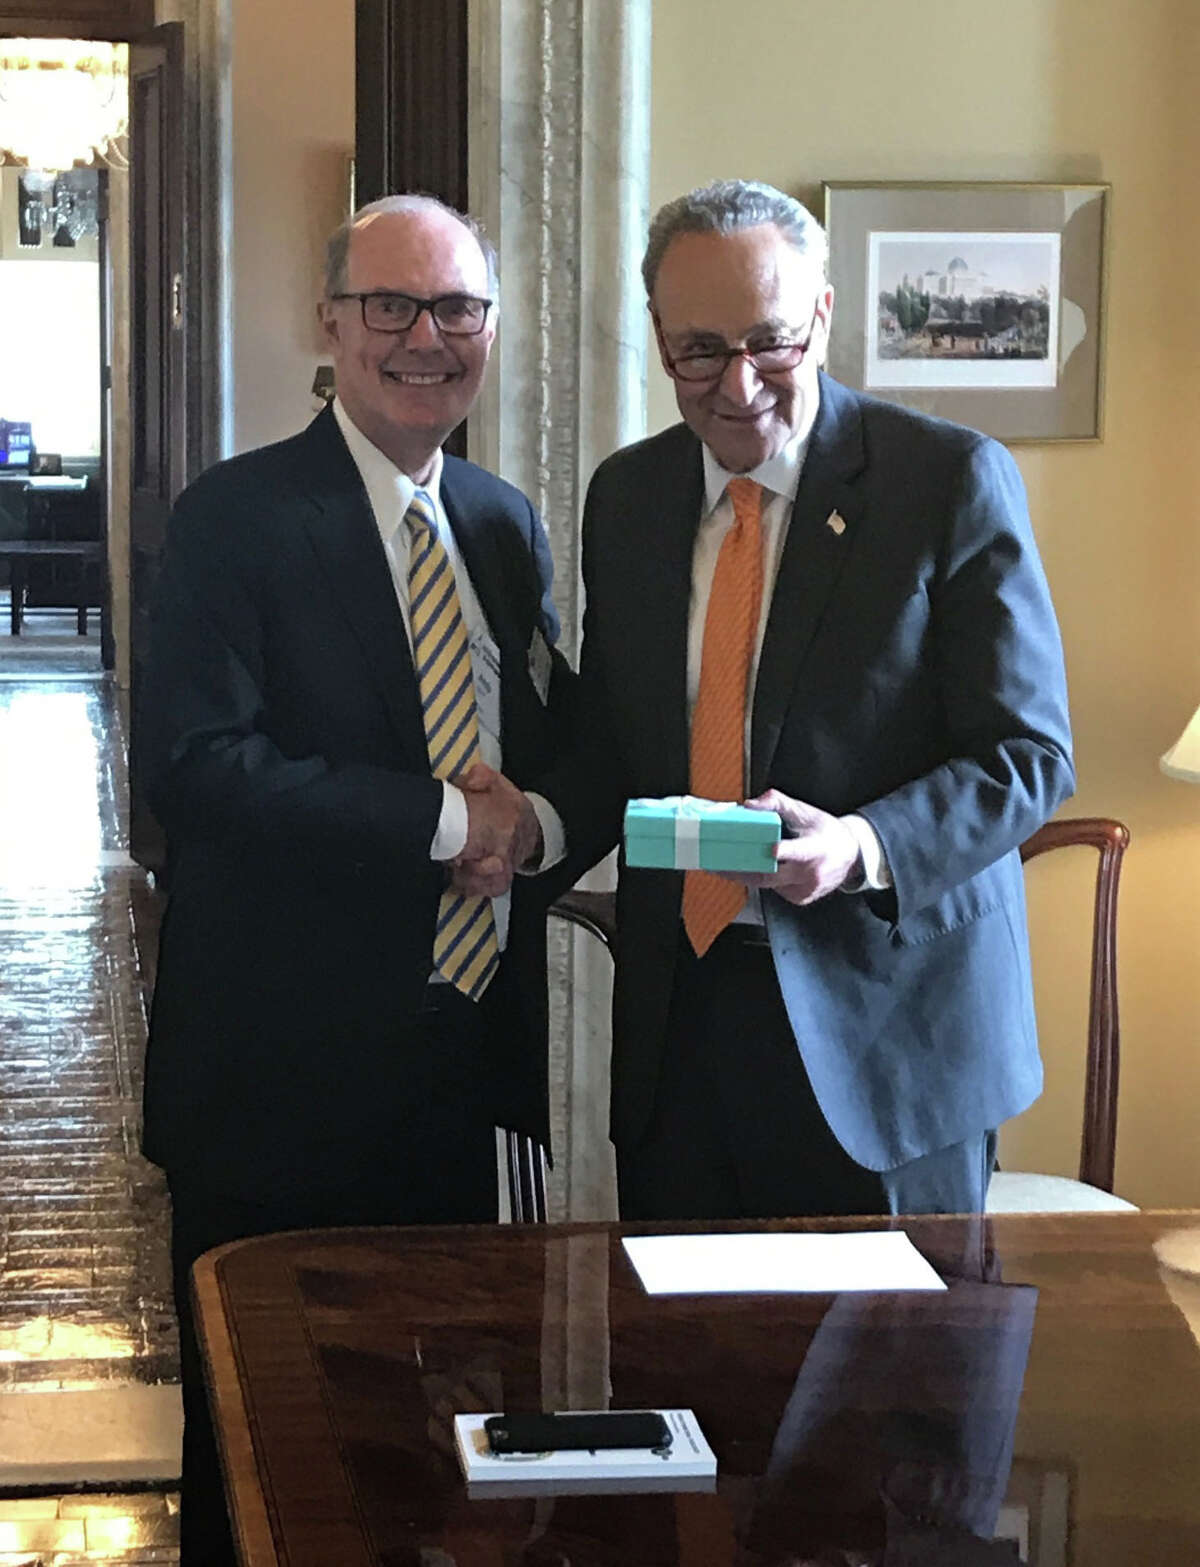 Plug Power CEO Andy Marsh, left, with U.S. Sen. Chuck Schumer of New York in Washington, D.C. Marsh presented Schumer with a special award for pushing through a tax credit on fuel cell purchases. ORG XMIT: MER2018061309315726